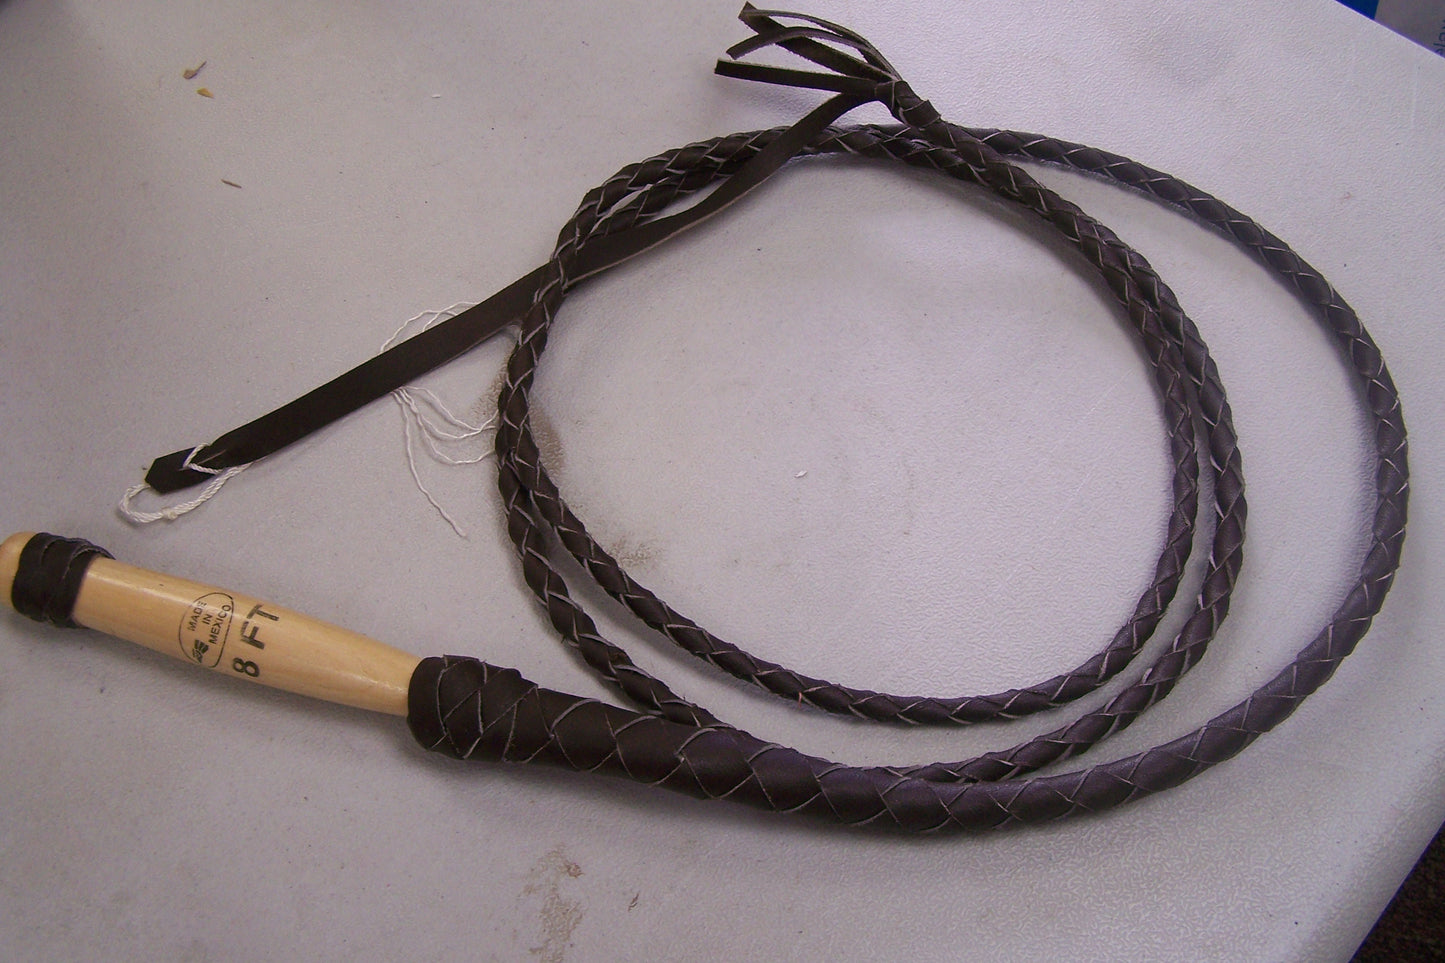 Indiana Jones Genuine Leather Handmade Bull Whip with Wooden Handle, 8'- Mexico